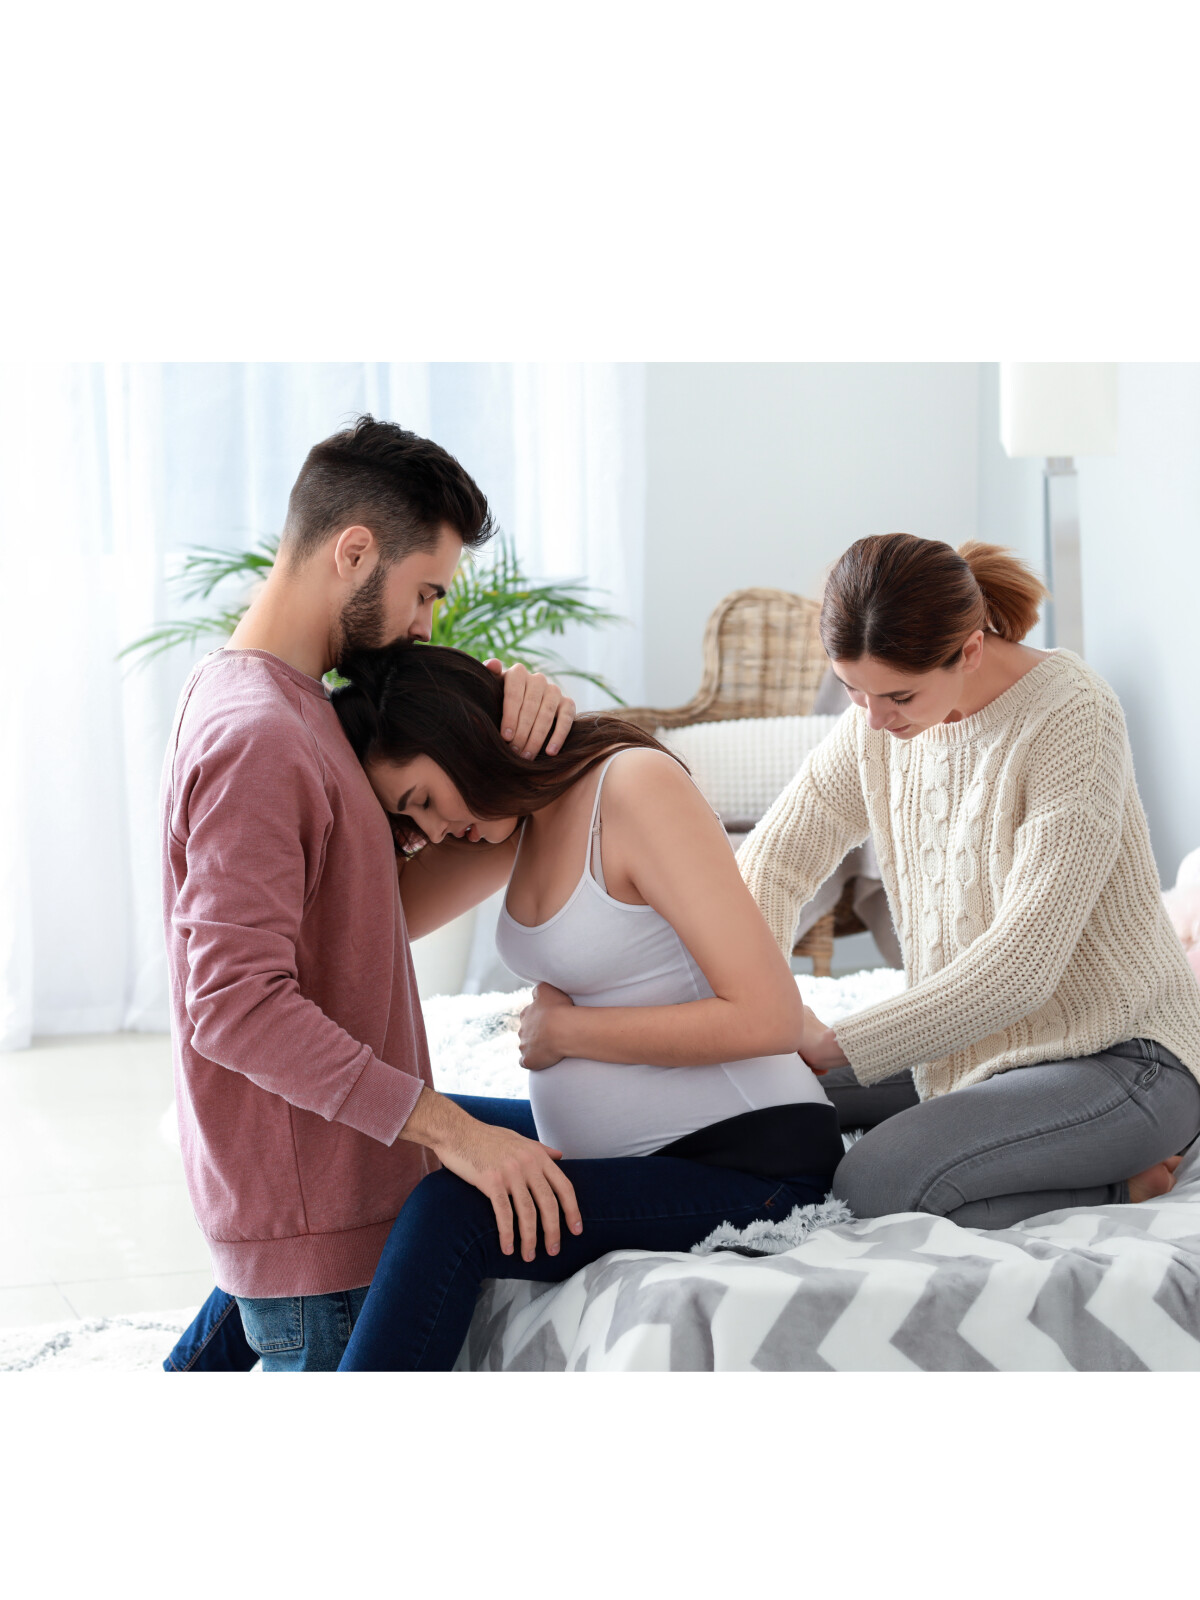 5 Reasons You Should NEVER Have a Doula During Birth